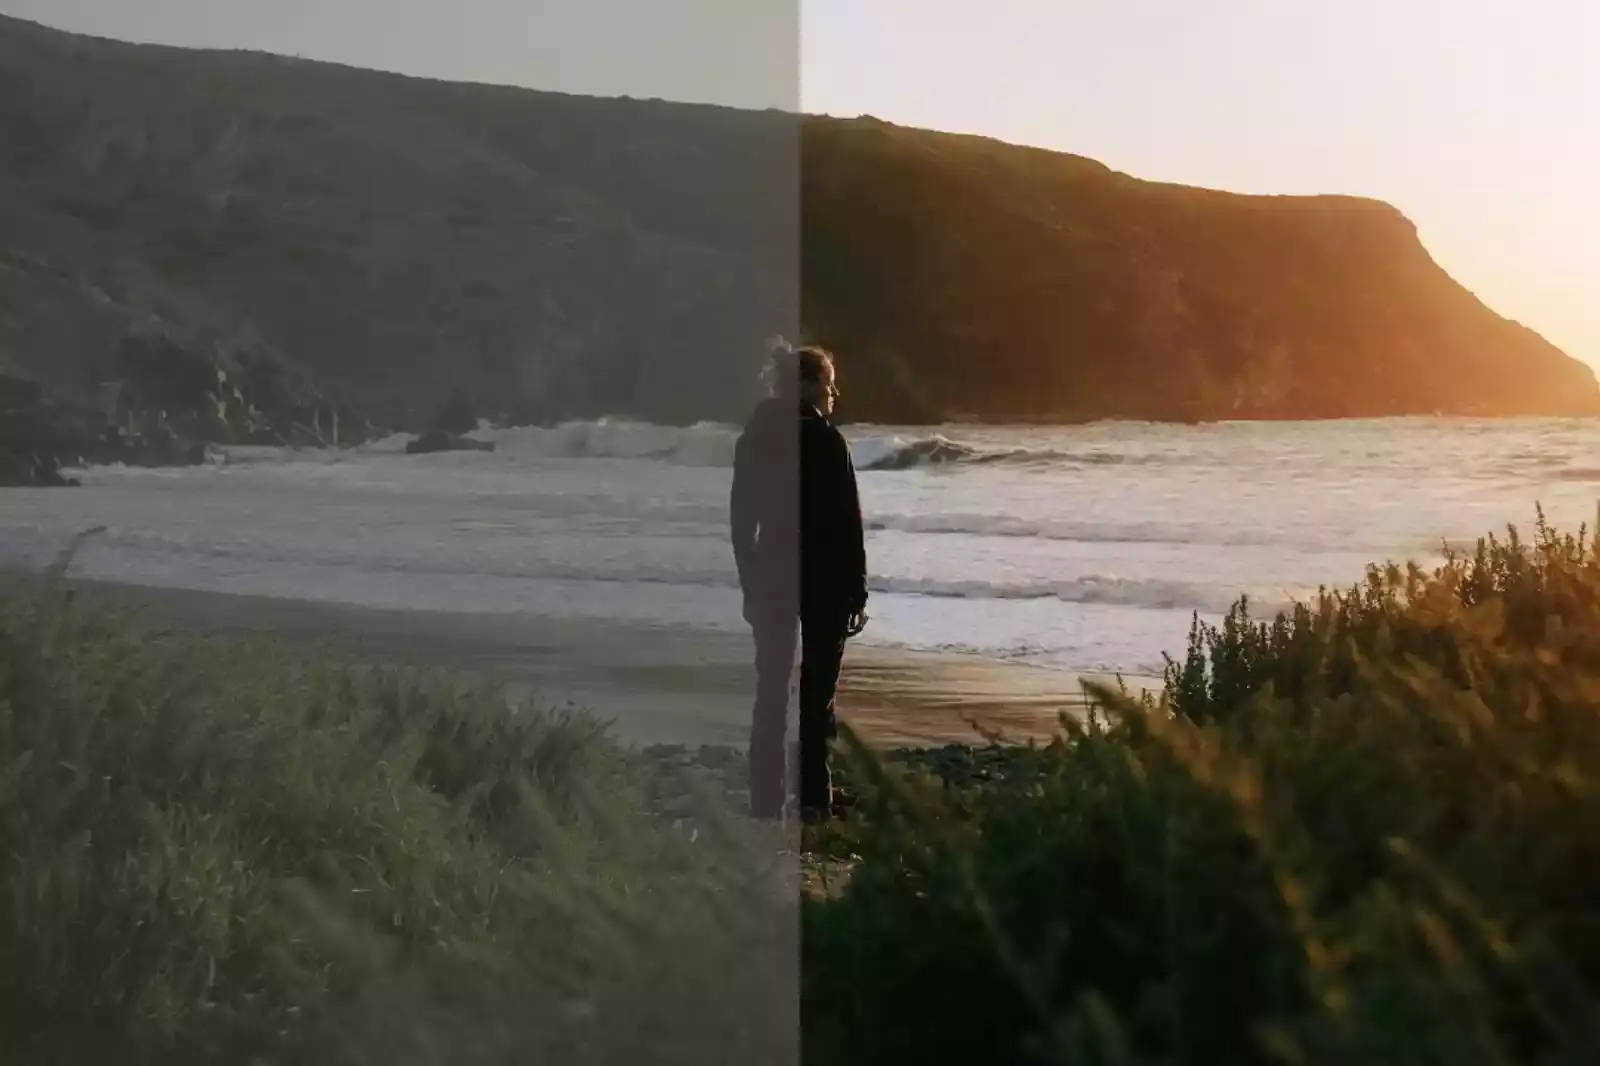 Colour Grading Manipulates the first Impression of an Image